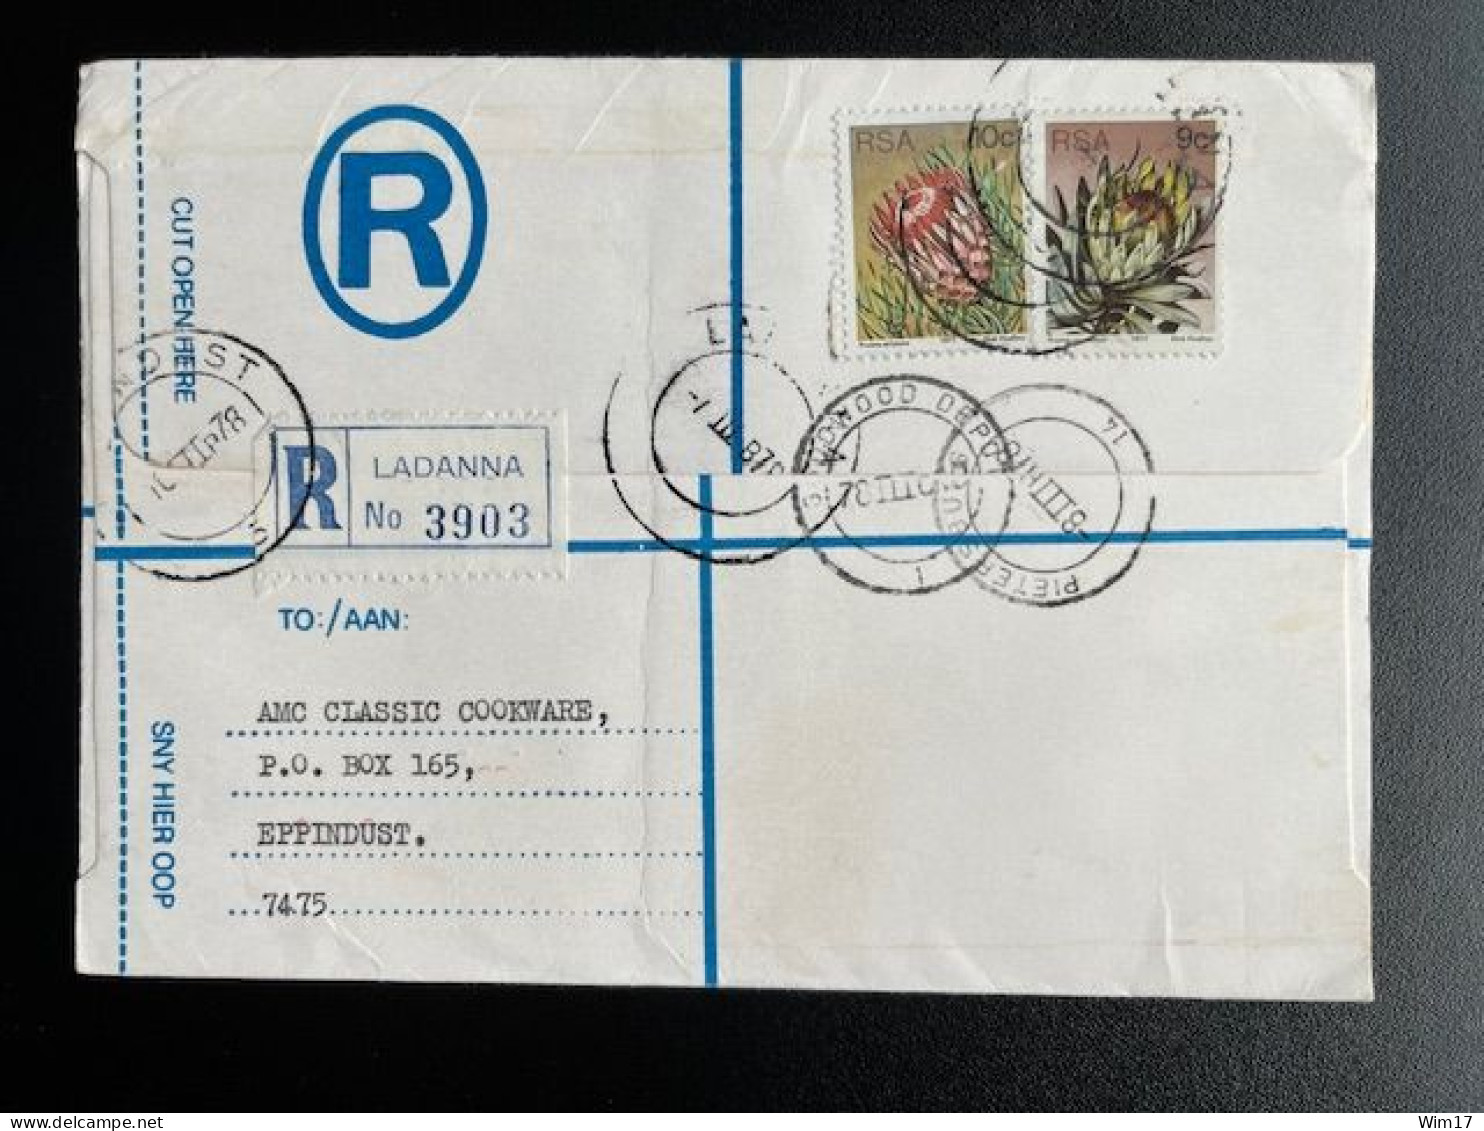 SOUTH AFRICA RSA 1978 REGISTERED LETTER LADANNA TO EPPINDUST CAPE TOWN 07-03-1978 ZUID AFRIKA - Covers & Documents